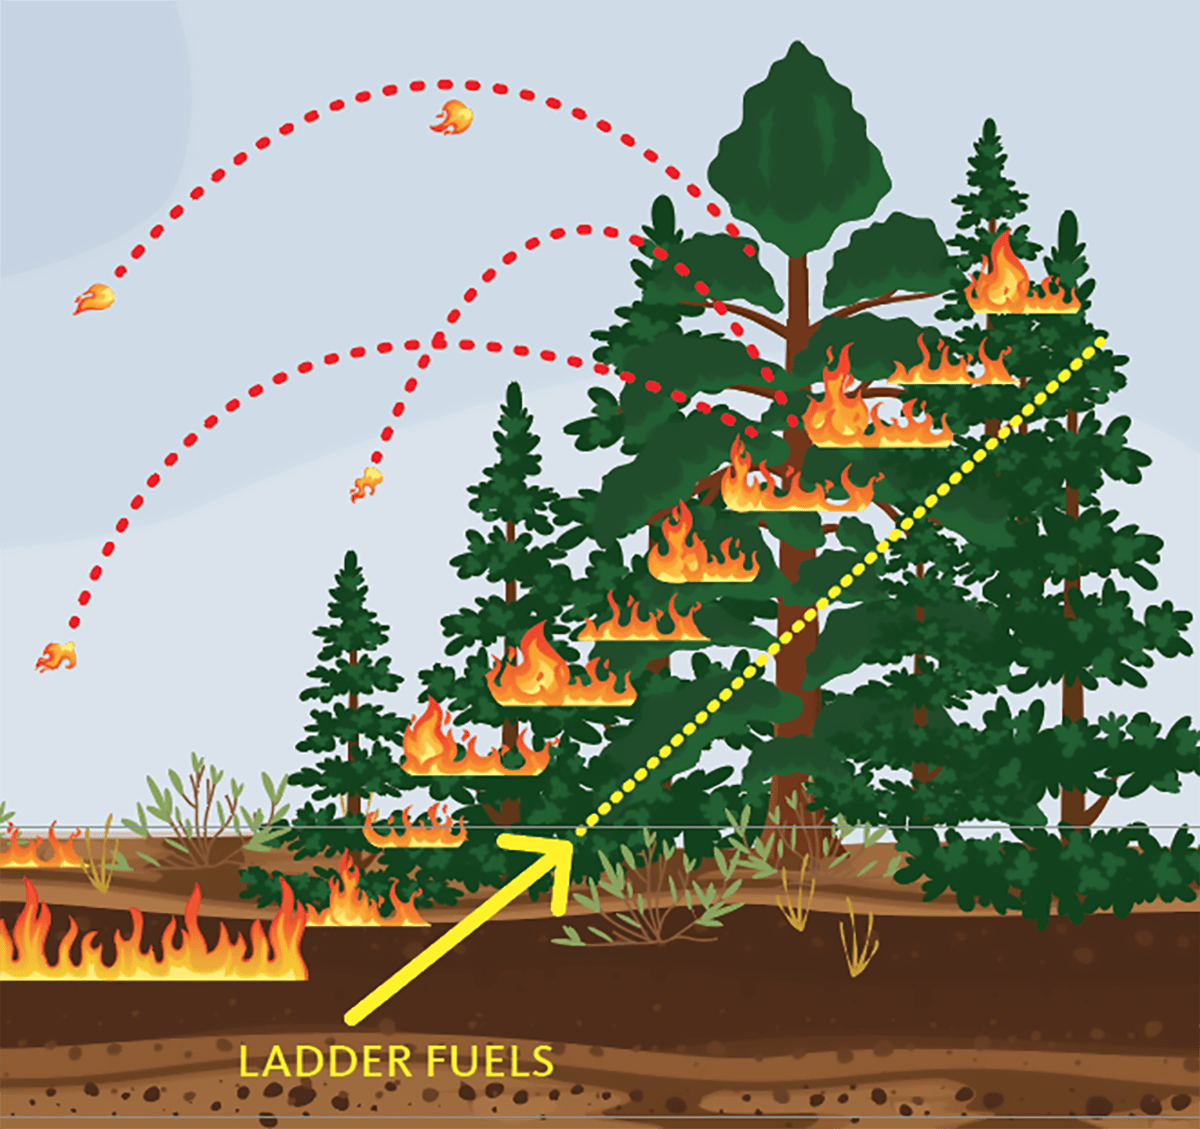 Ladder fuels allow fire to spread from lower-growing plants that are continuously connected to taller plants. Embers rain down from tall trees to lower-growing plants (fire spreads both ways).